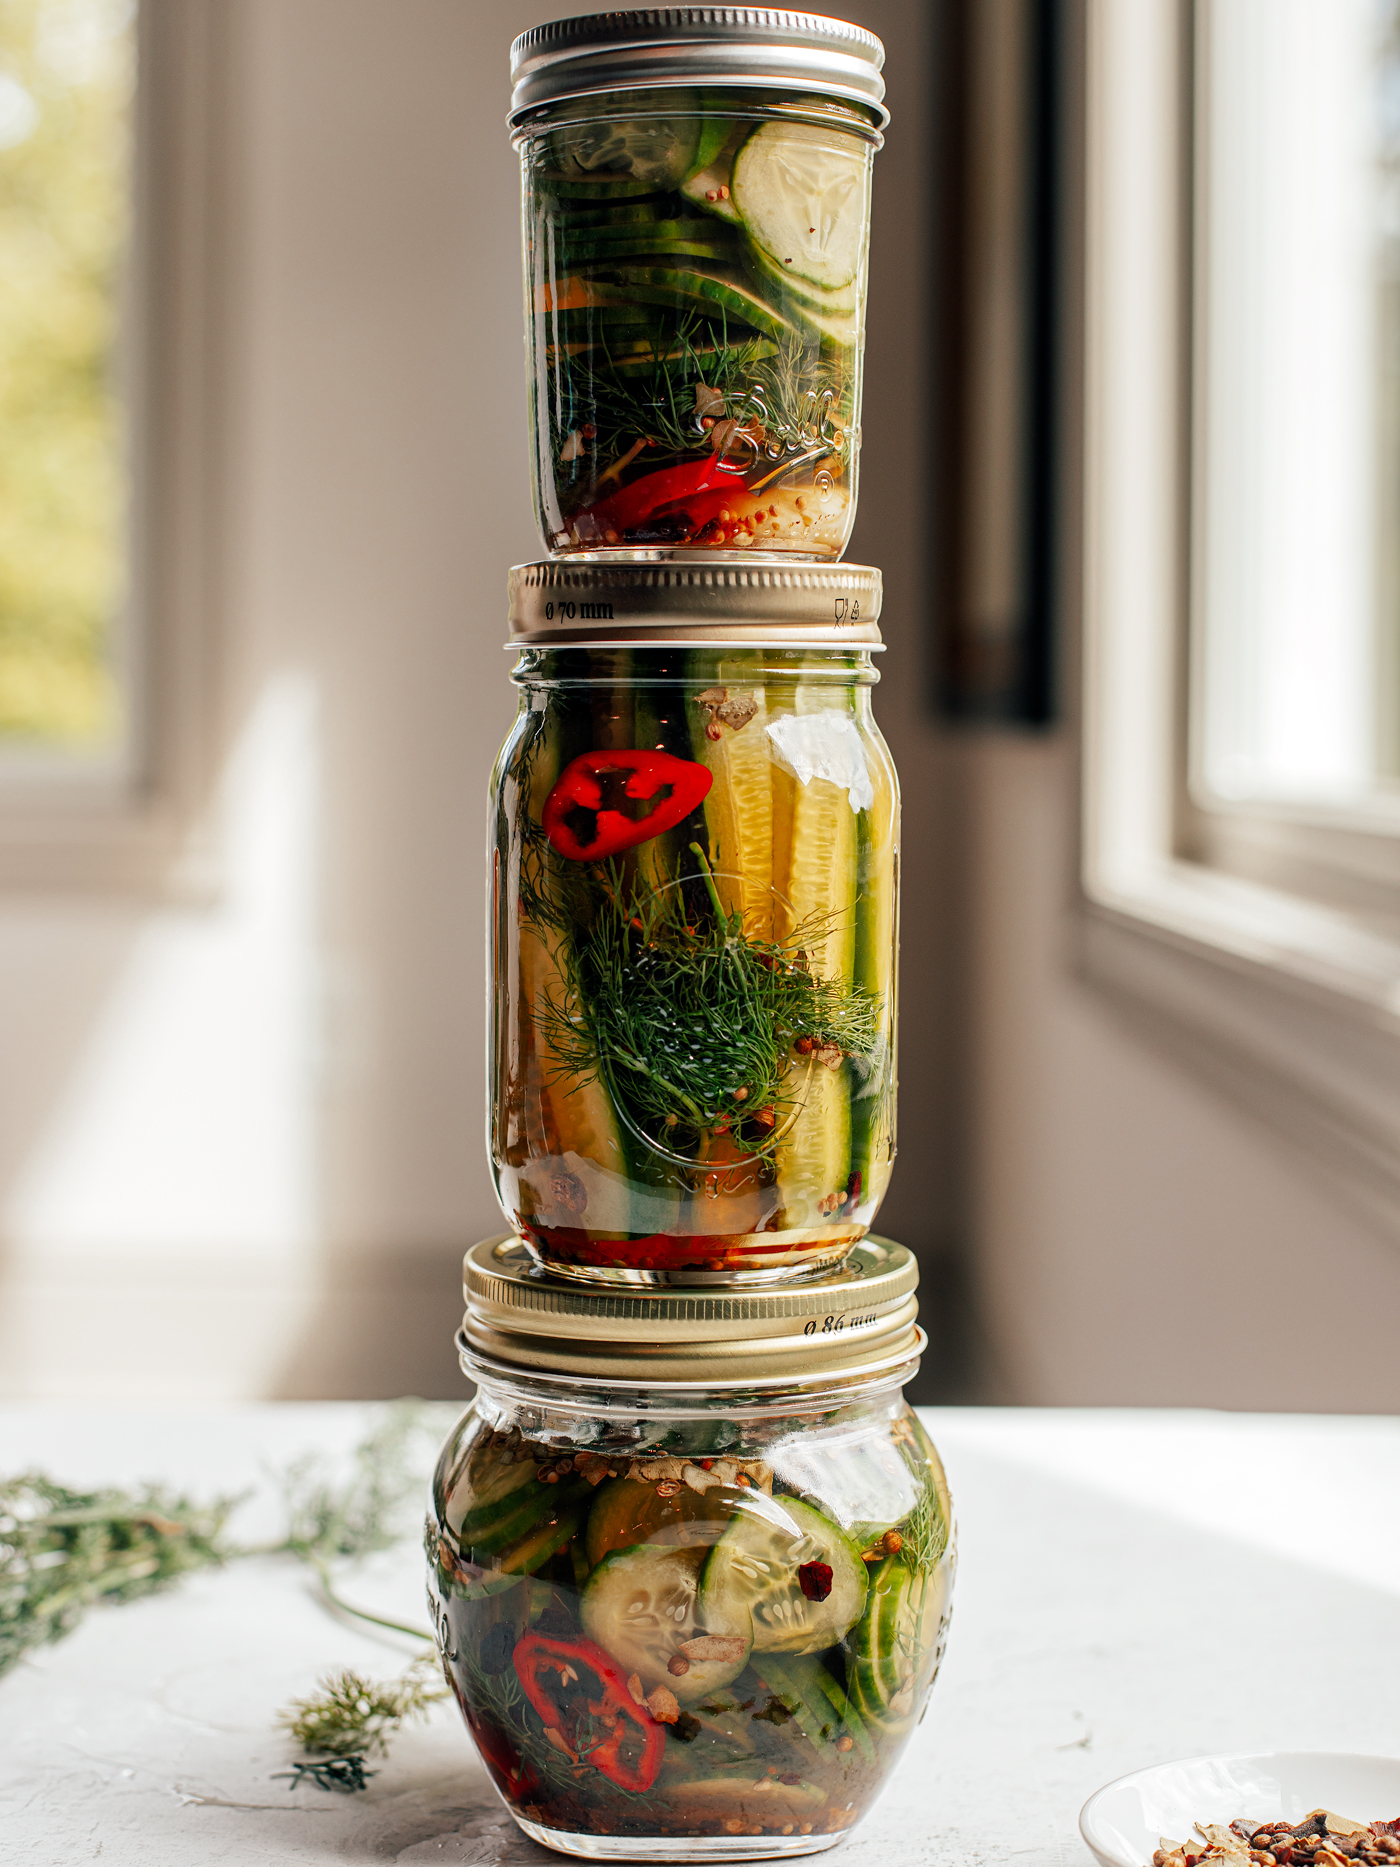 Three different sized jars of refrigerator pickles stacked on top of one another on a countertop.